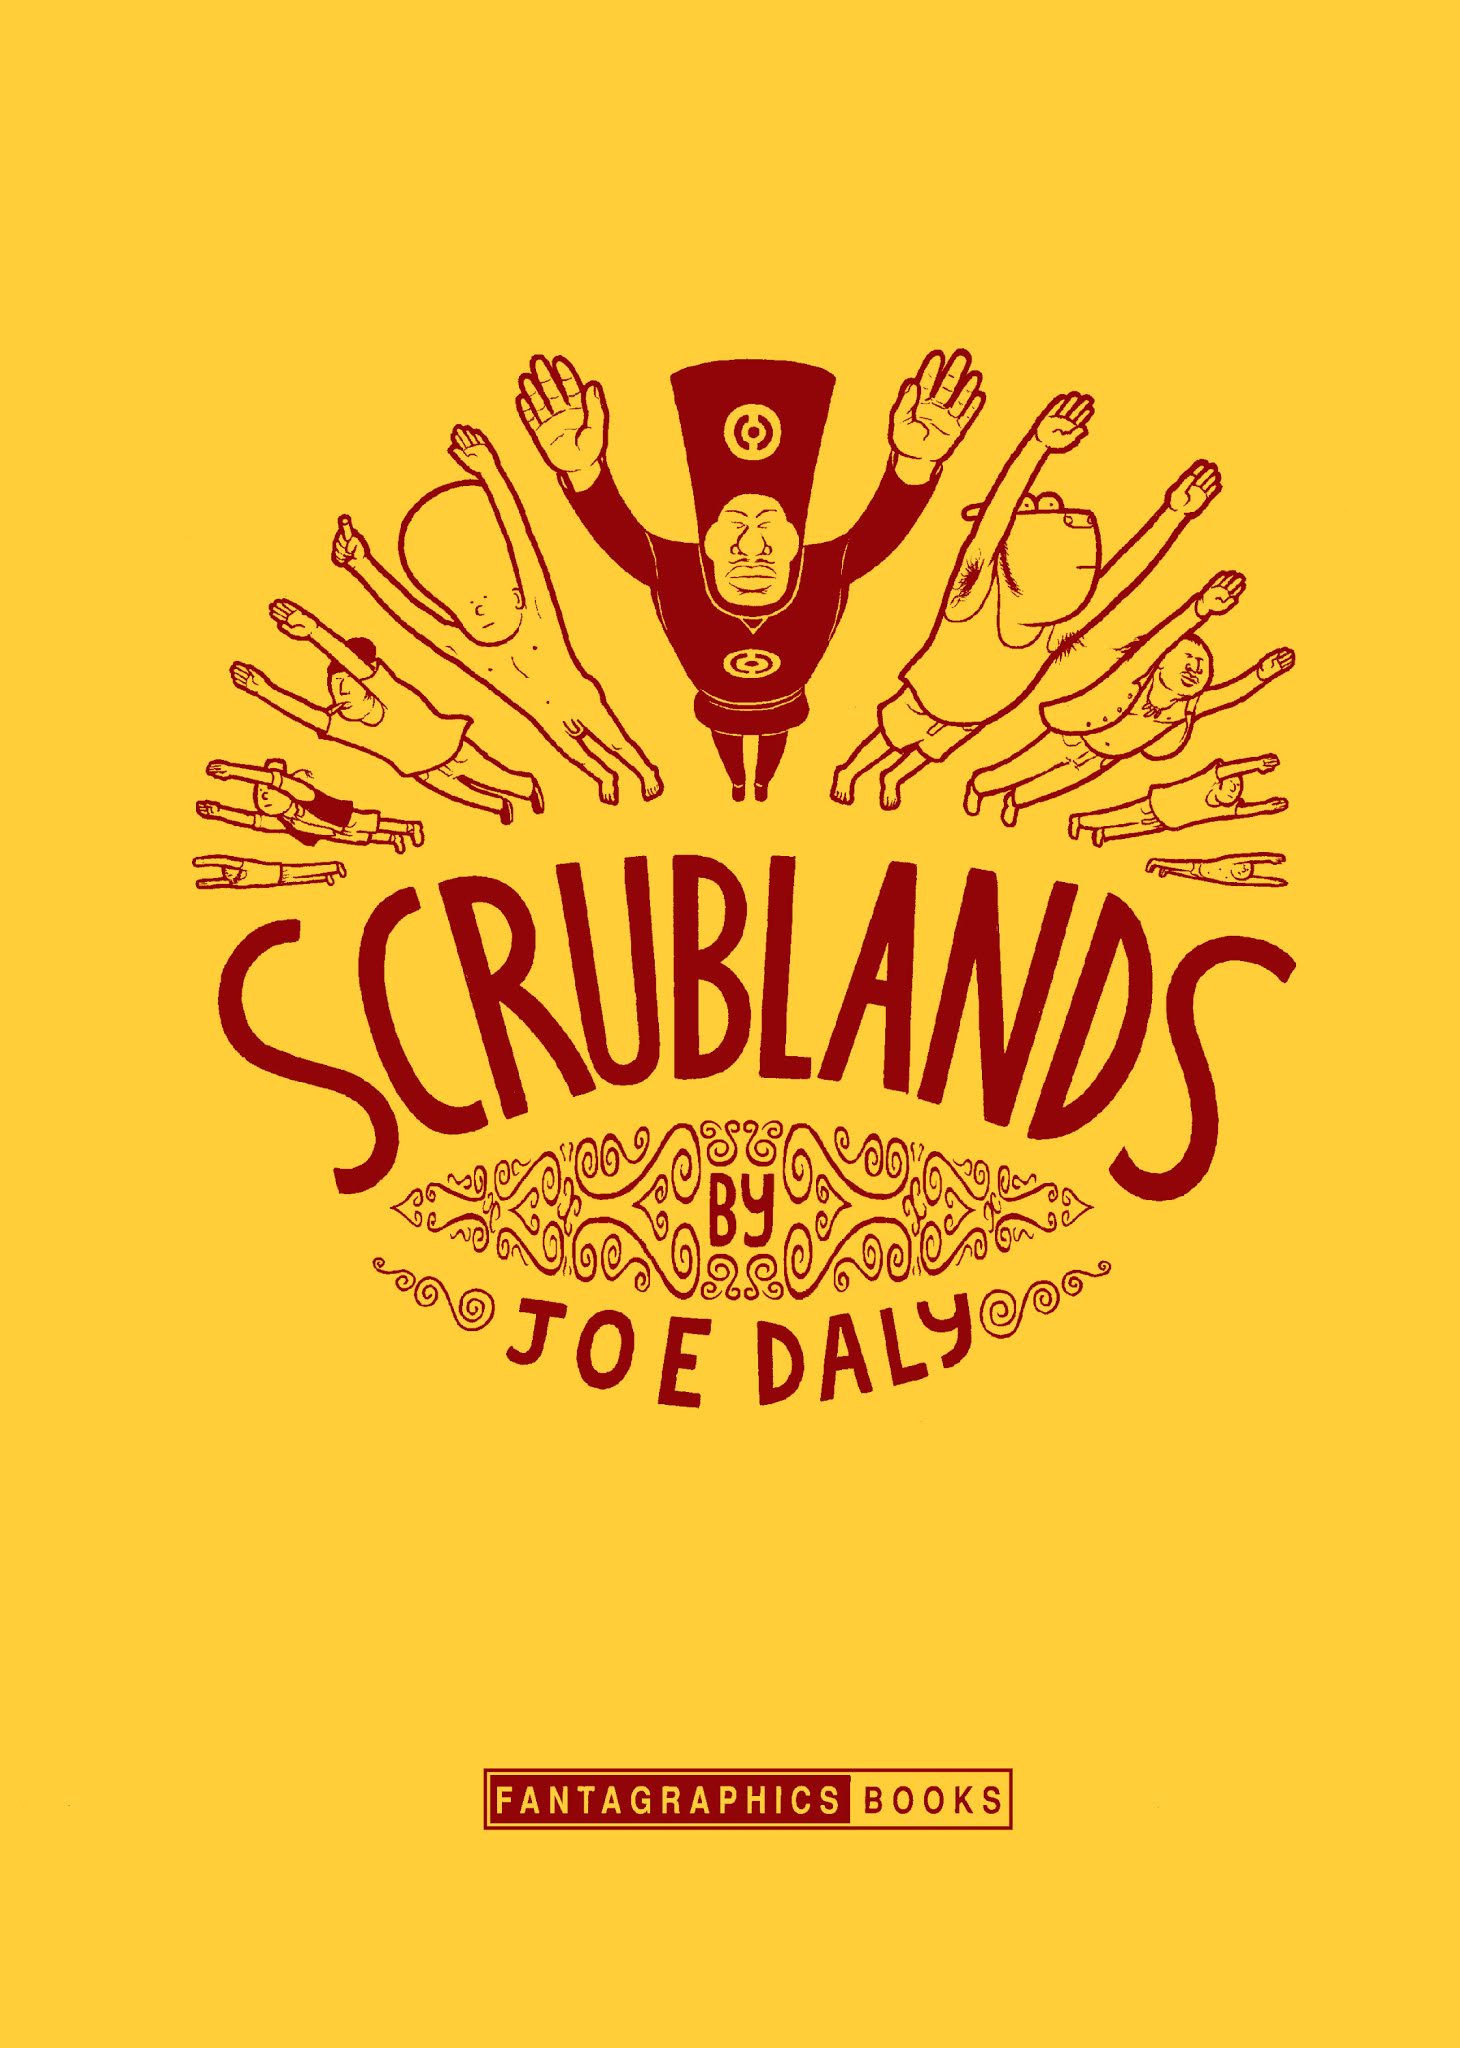 Read online Scrublands comic -  Issue # TPB - 3